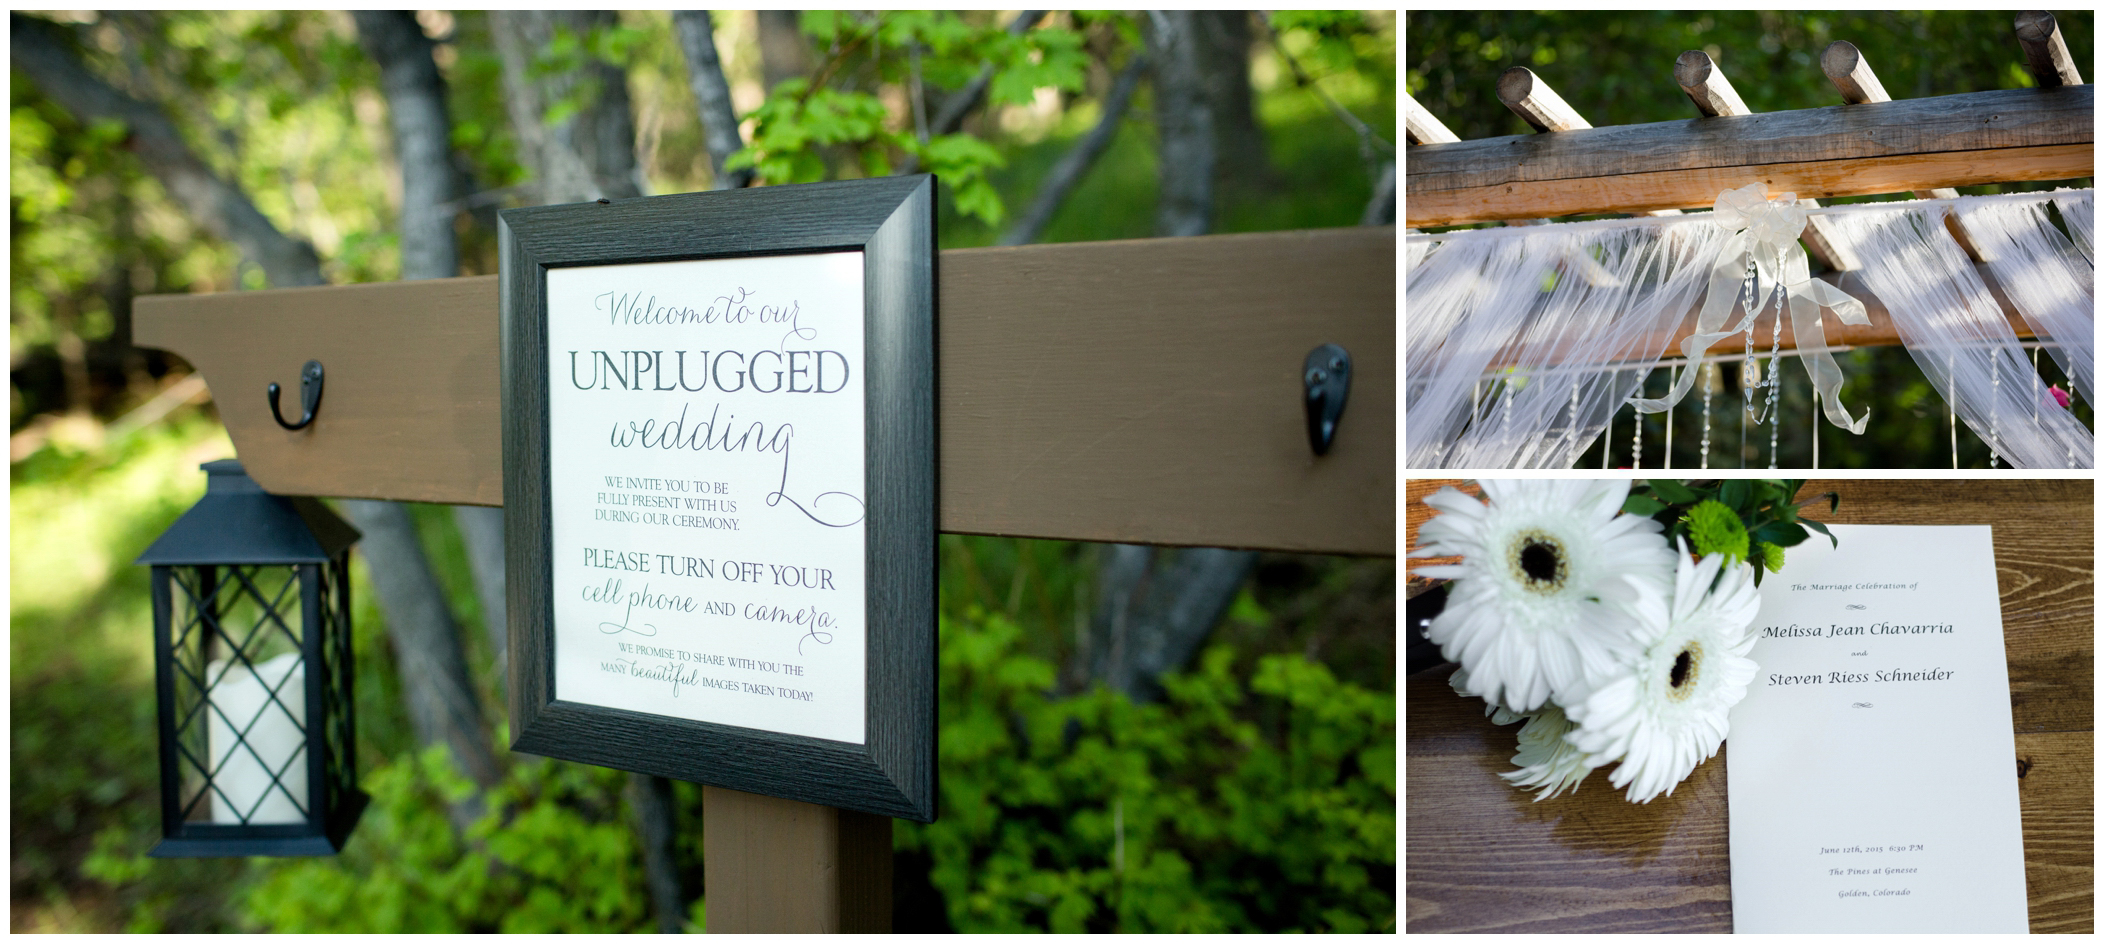 picture of unplugged wedding sign